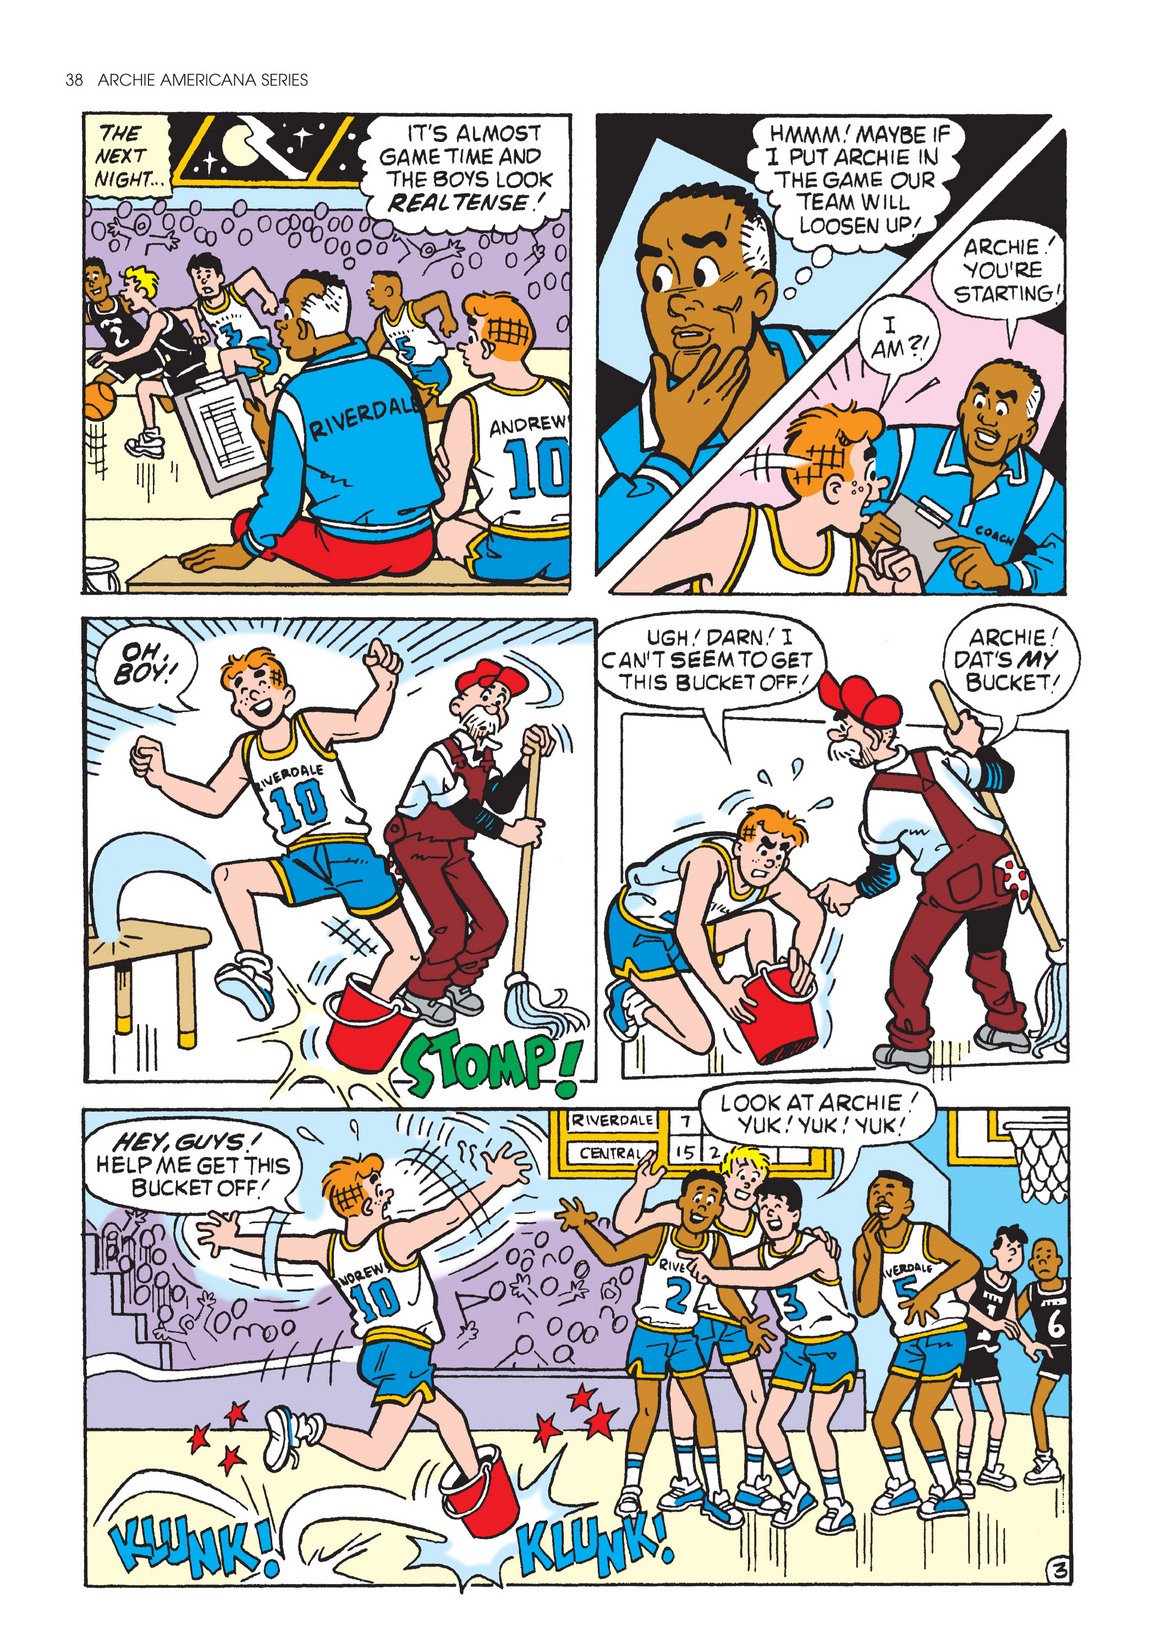 Read online Archie Americana Series comic -  Issue # TPB 9 - 40